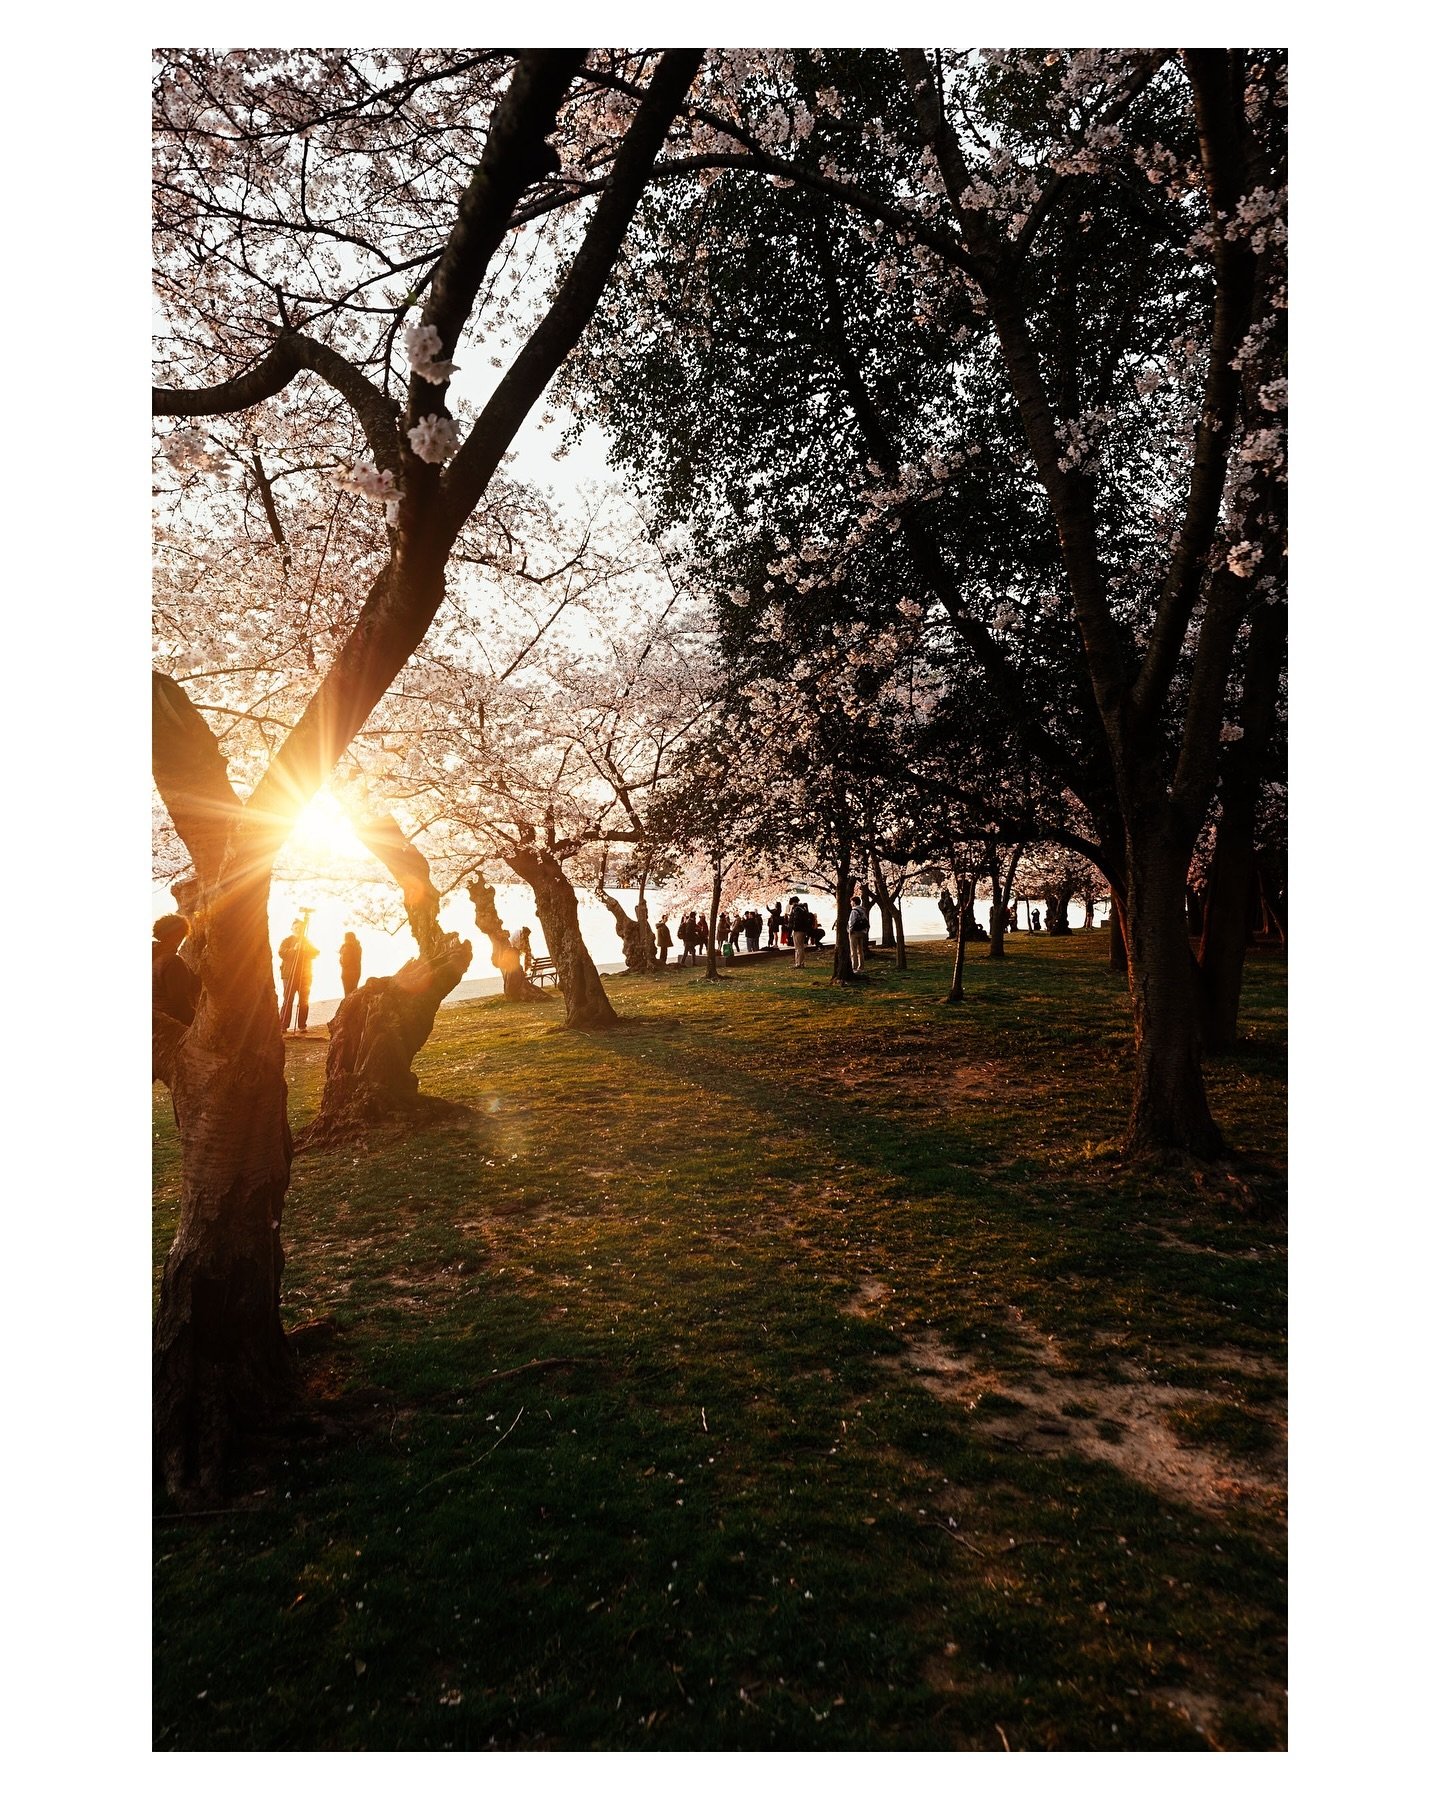 🌸 First light at the Tidal Basin &ndash; I got to capture the magic of sunrise amidst blooming cherry blossoms with @igdc 🌅 This serene scene was a dream to photograph, especially with the gentle hum of people soaking in the beauty around me. 📸✨ F